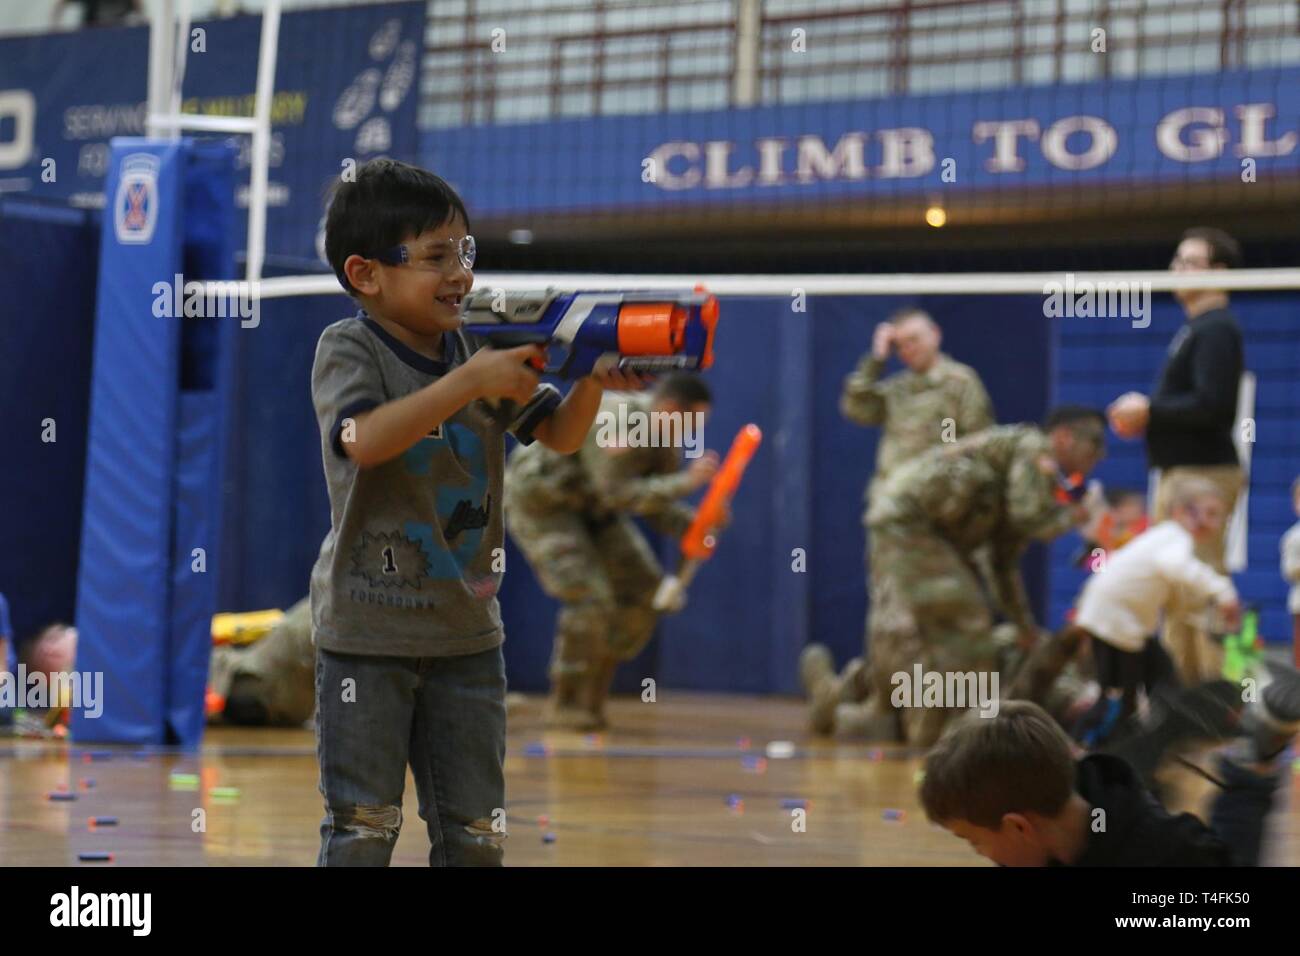 Miniature warriors from Families across 2nd Brigade Combat Team, 10th Mountain Division, assembled to face Soldiers of the 41st Engineer Battalion during the Commando brigade's second 'Nerf Wars' match held inside a makeshift battlefield configured throughout the Magrath Sports Complex basketball court, April 10, 2019, at Fort Drum, New York. Foam darts littered the gym floor during the 'just for fun' event as opposing forces fueled by popcorn and cotton candy engaged in a play firefight. Stock Photo